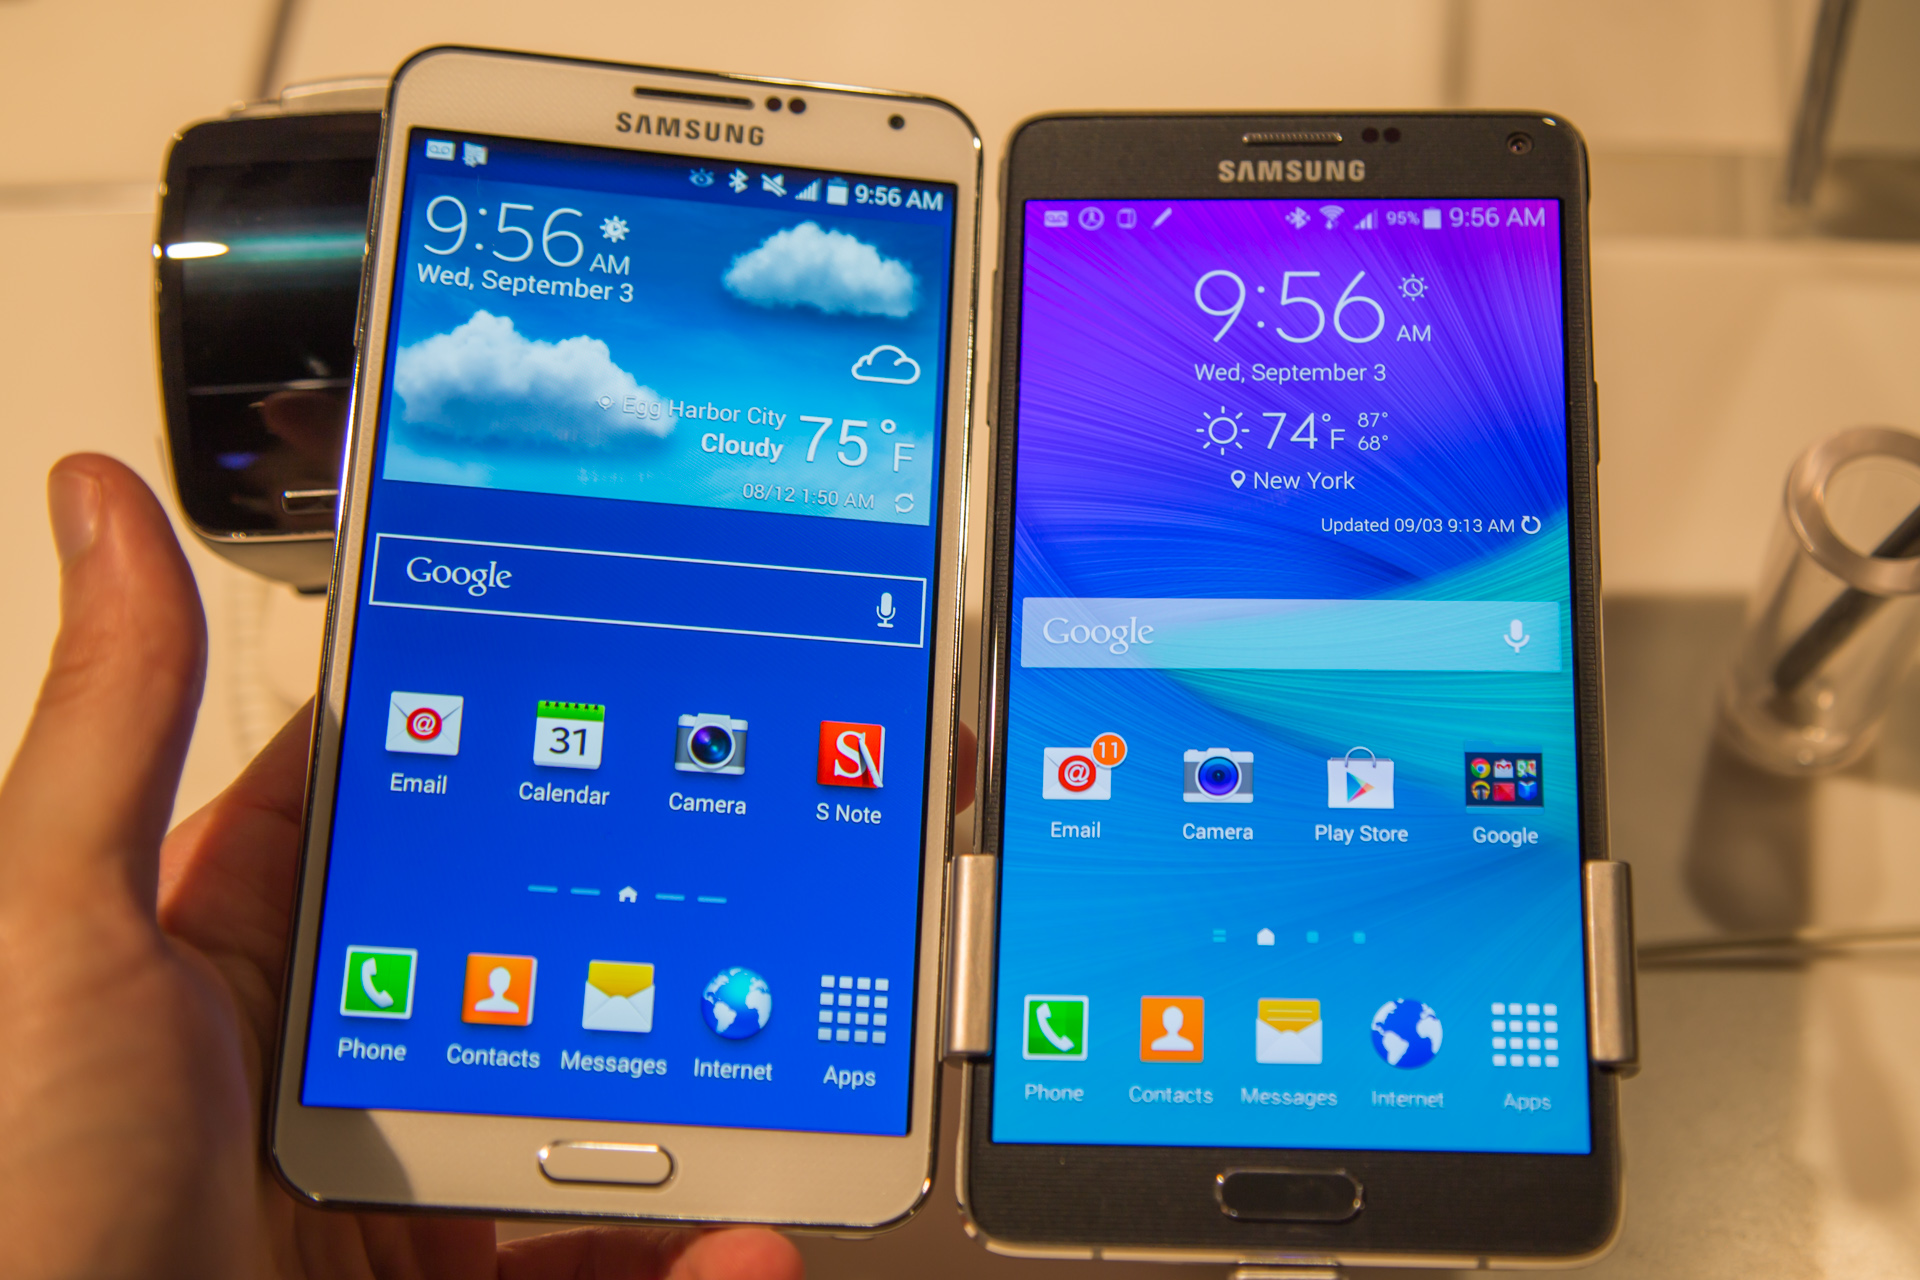 Samsung note 4g. Galaxy Note 4. Самсунг галакси ноут 4. Samsung Galaxy Note 4 SM-n910f. Samsung Note 4 Pro.